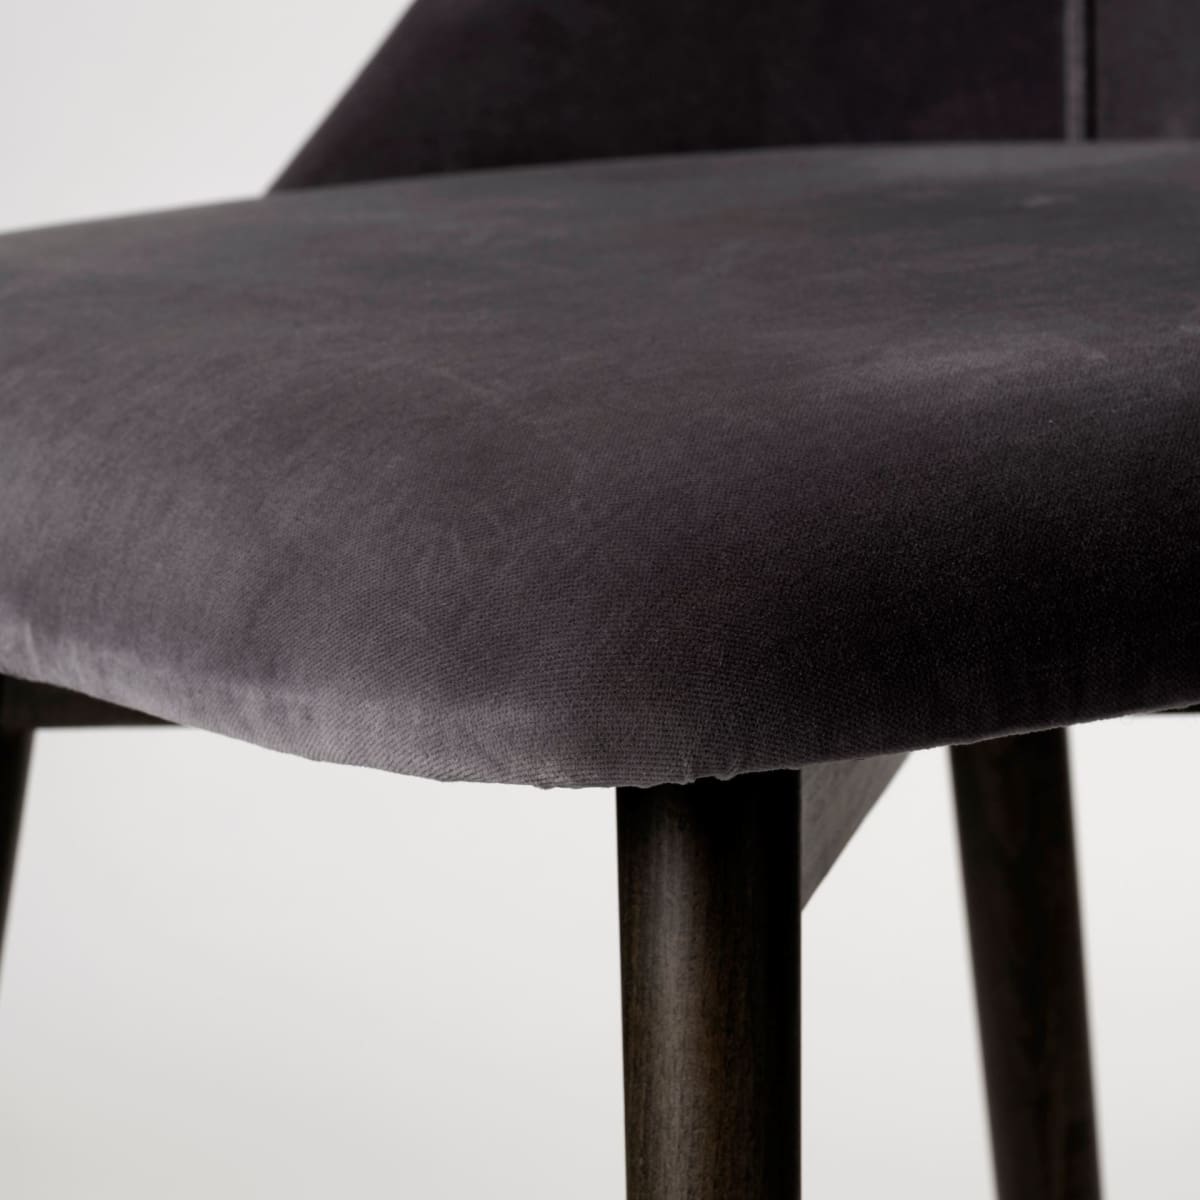 Ronald Dining Chair Gray Velvet | Black Wood (Side Chair) - dining-chairs